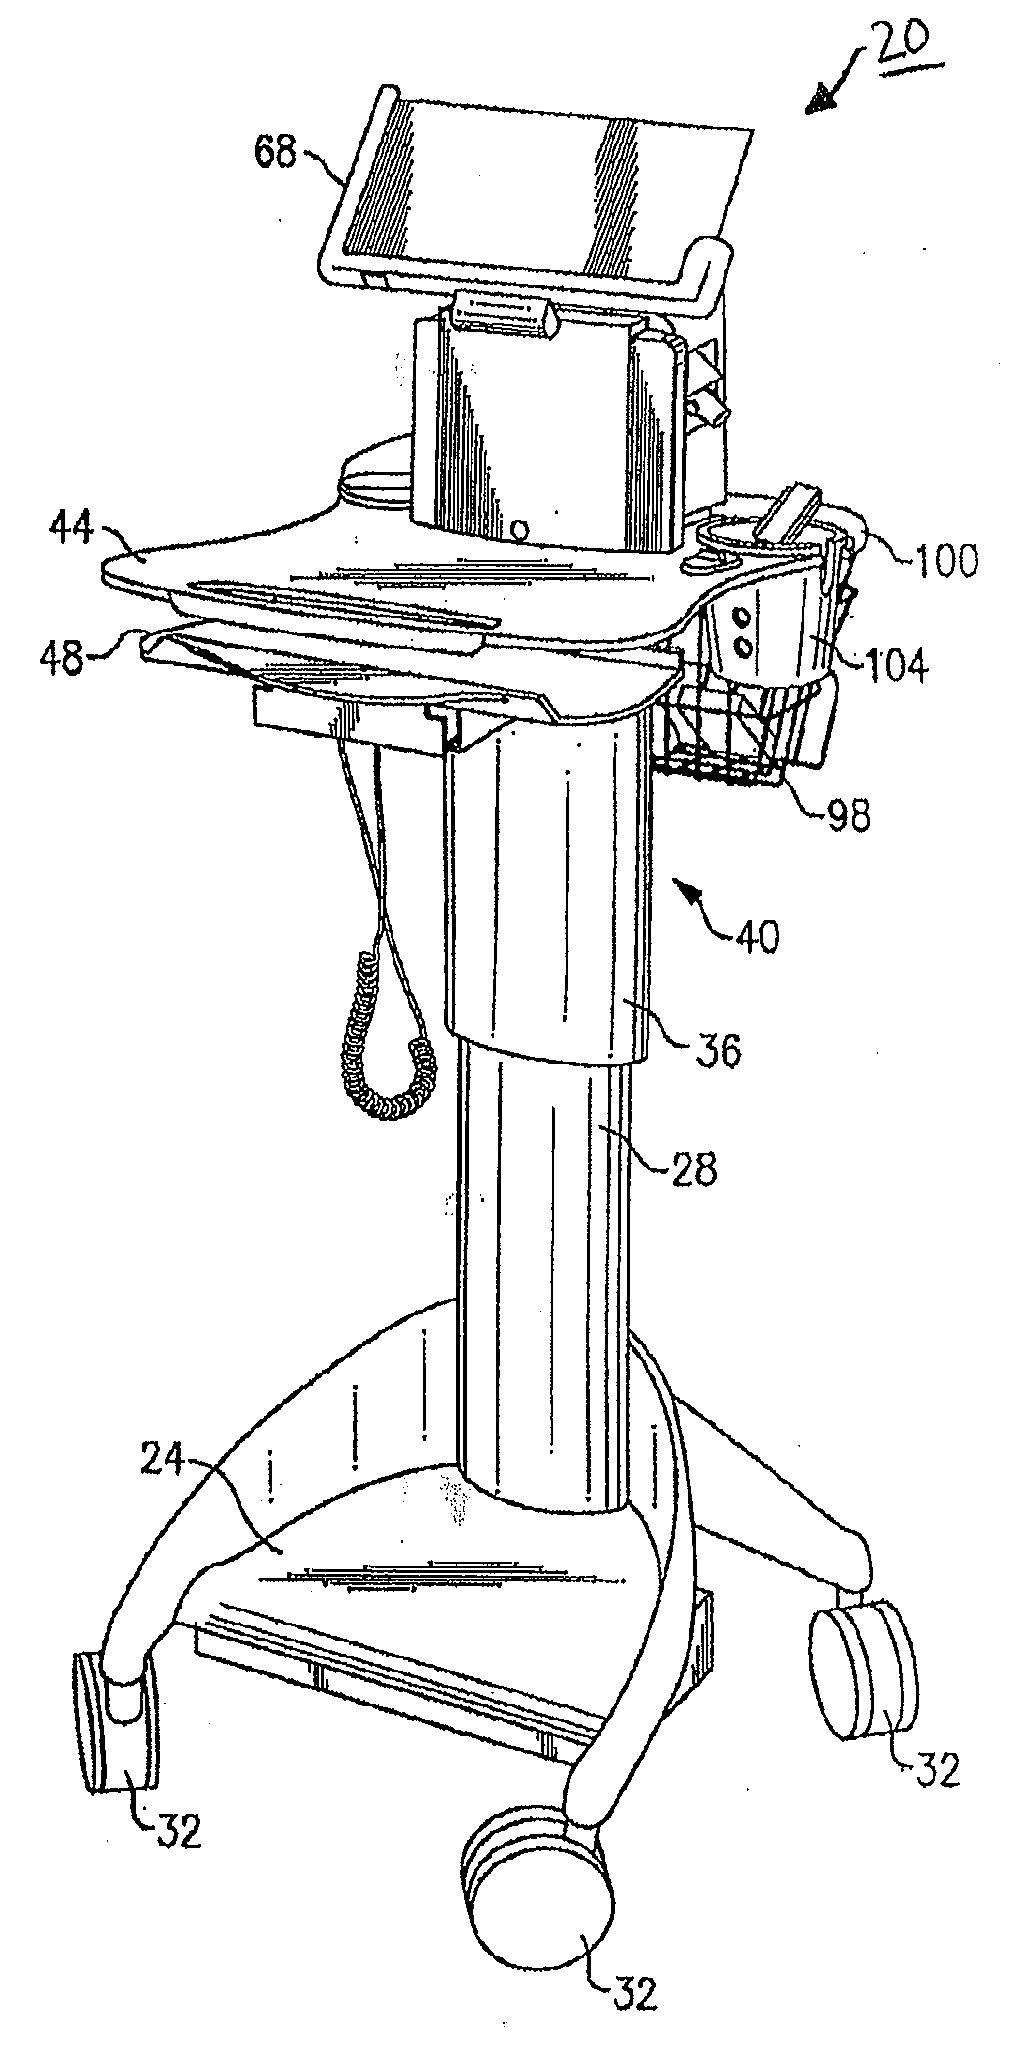 Mobile medical workstation and a temporarily associating mobile computing device